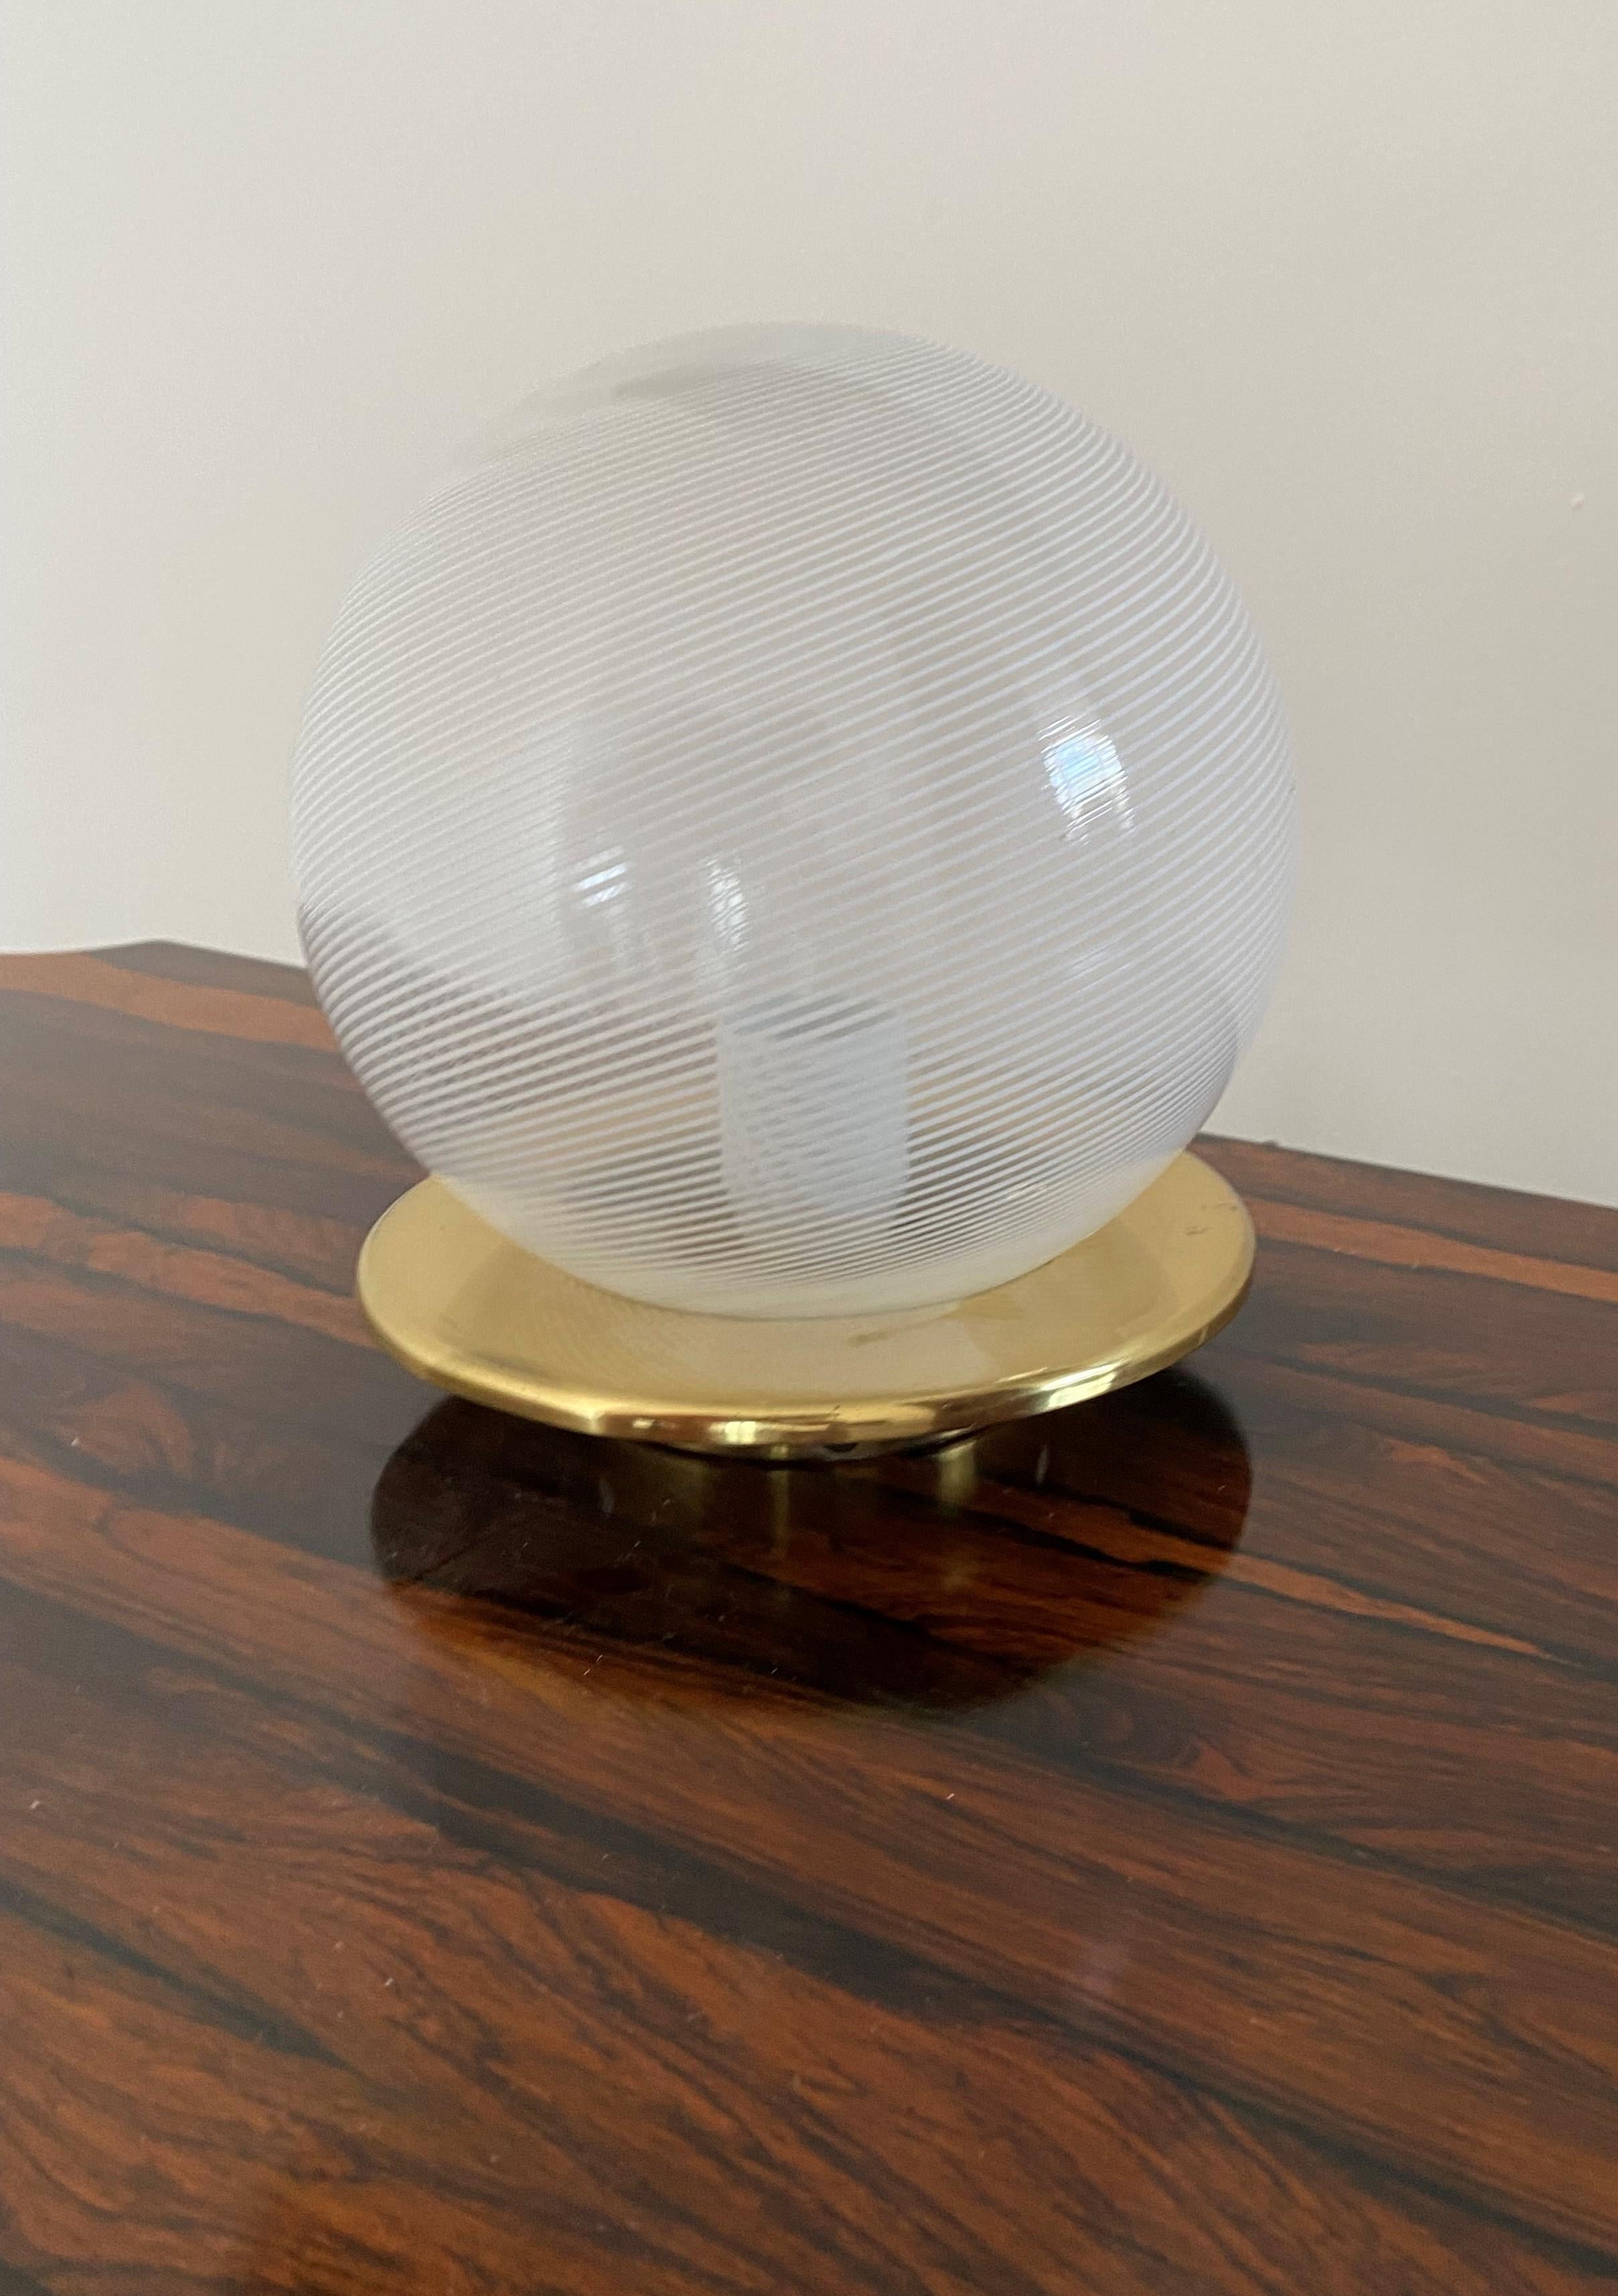 Late 20th Century Mid-Century Modern Table Lamp Attributed to Venini, Murano, circa 1970 For Sale